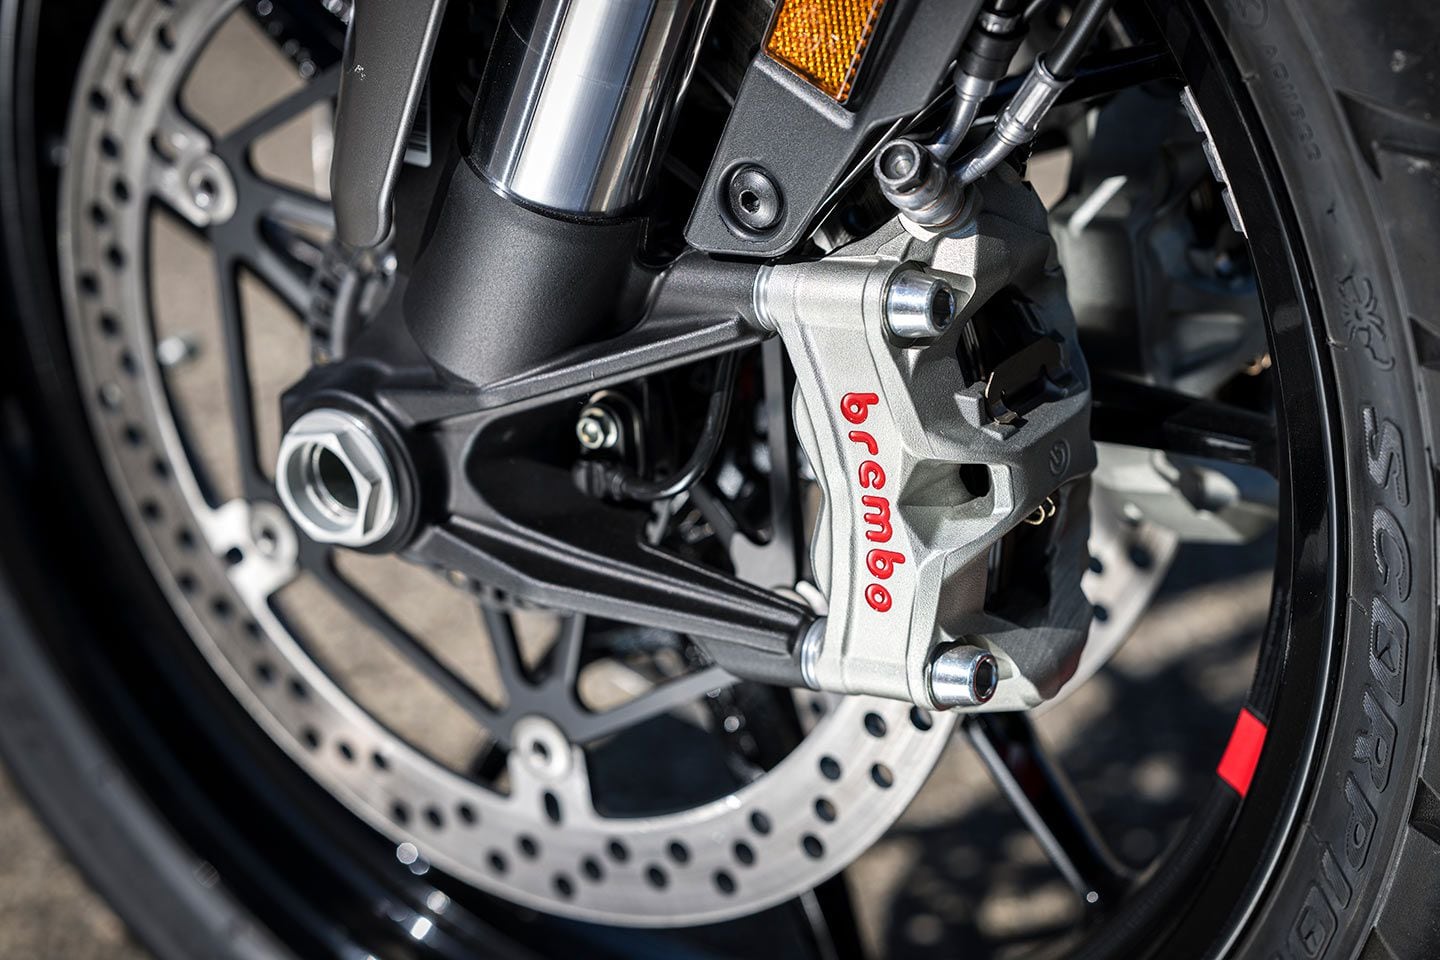 Brembo Stylema front calipers matched to 330mm discs offer sportbike-like braking performance.